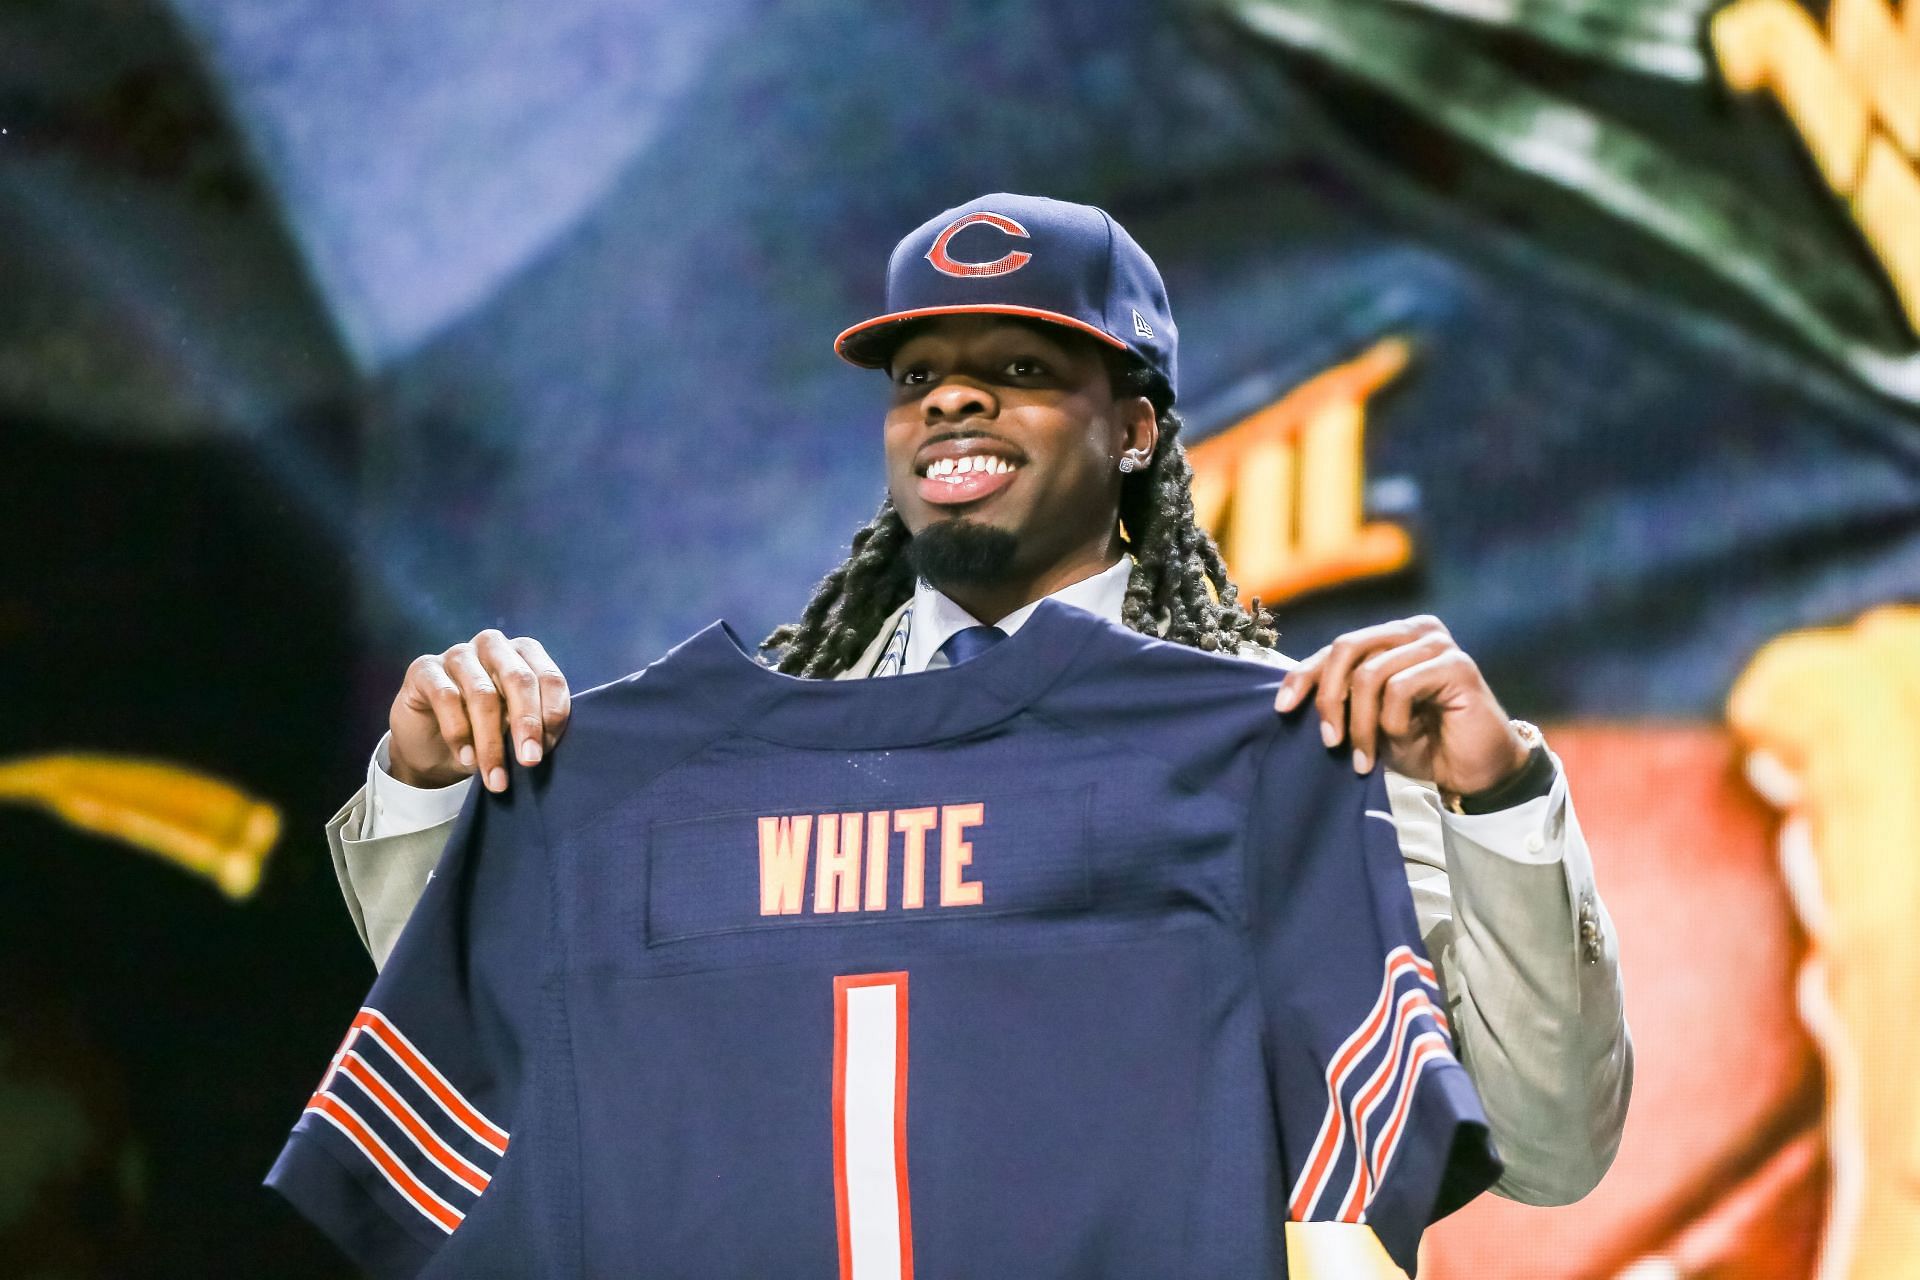 Kevin White was one of the biggest draft busts for Chicago Bears